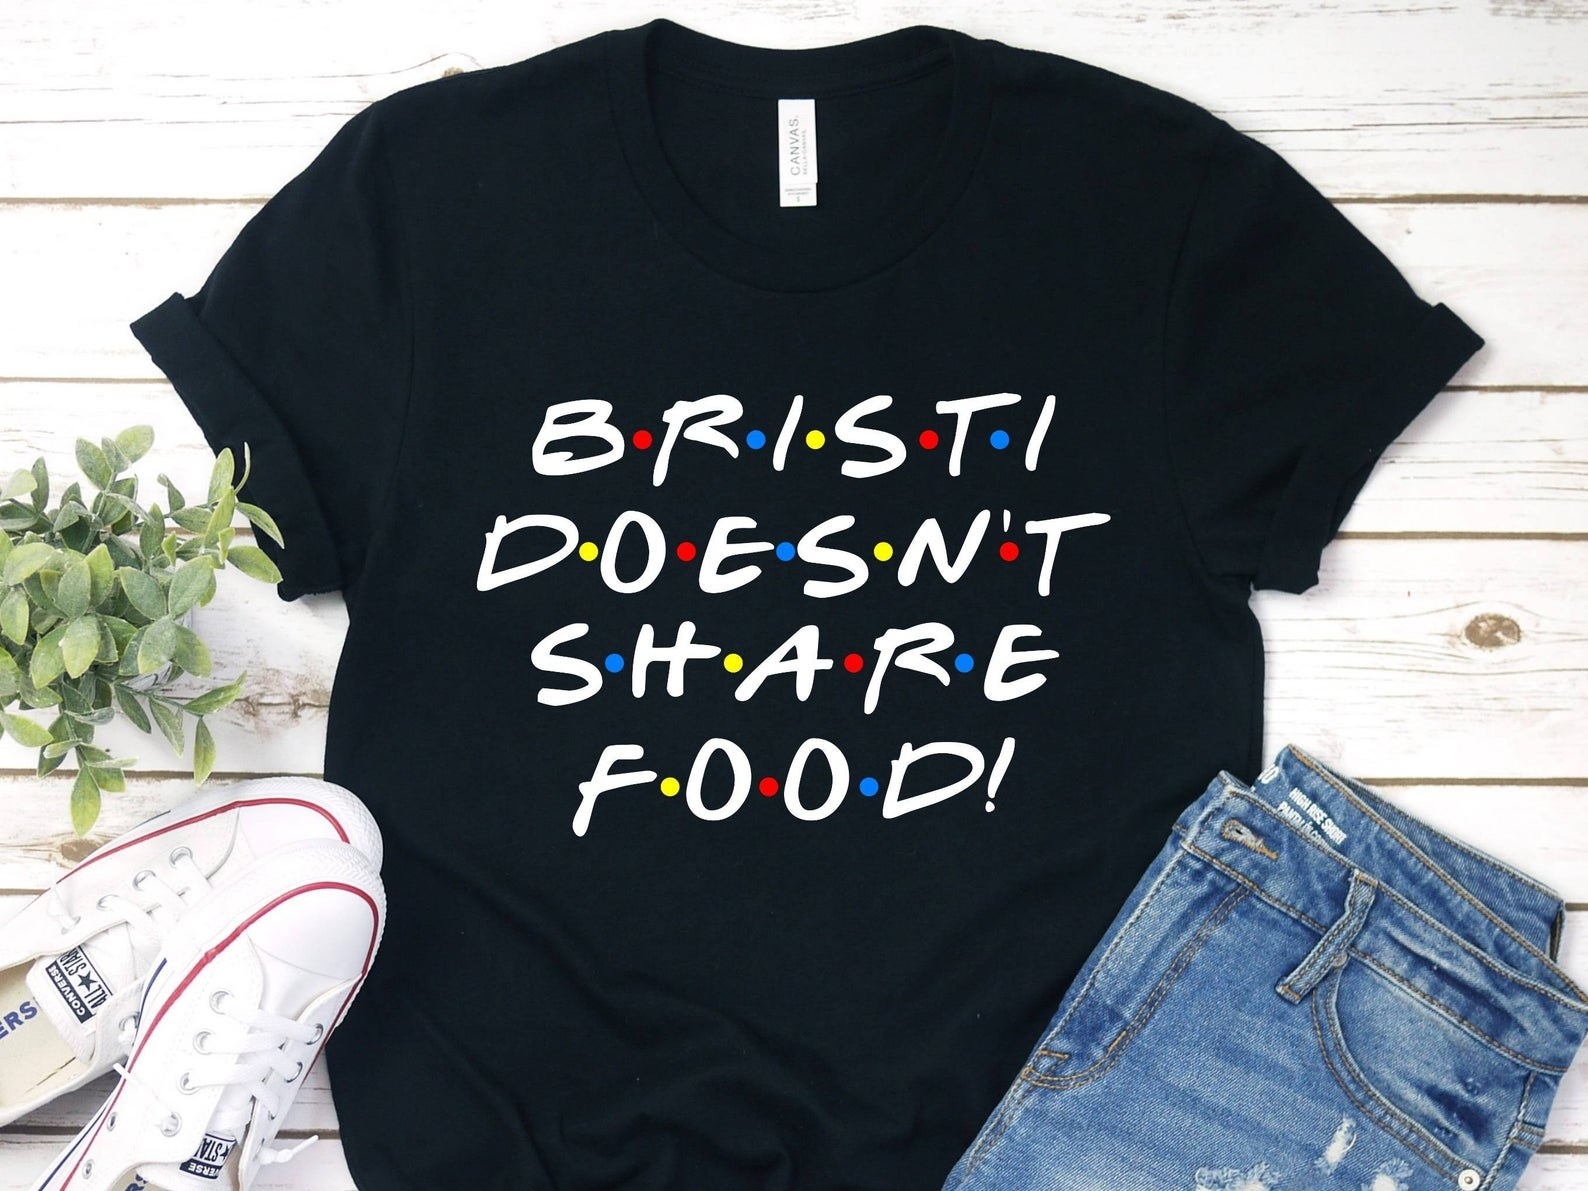 27 Things To Wear That May Make You Laugh